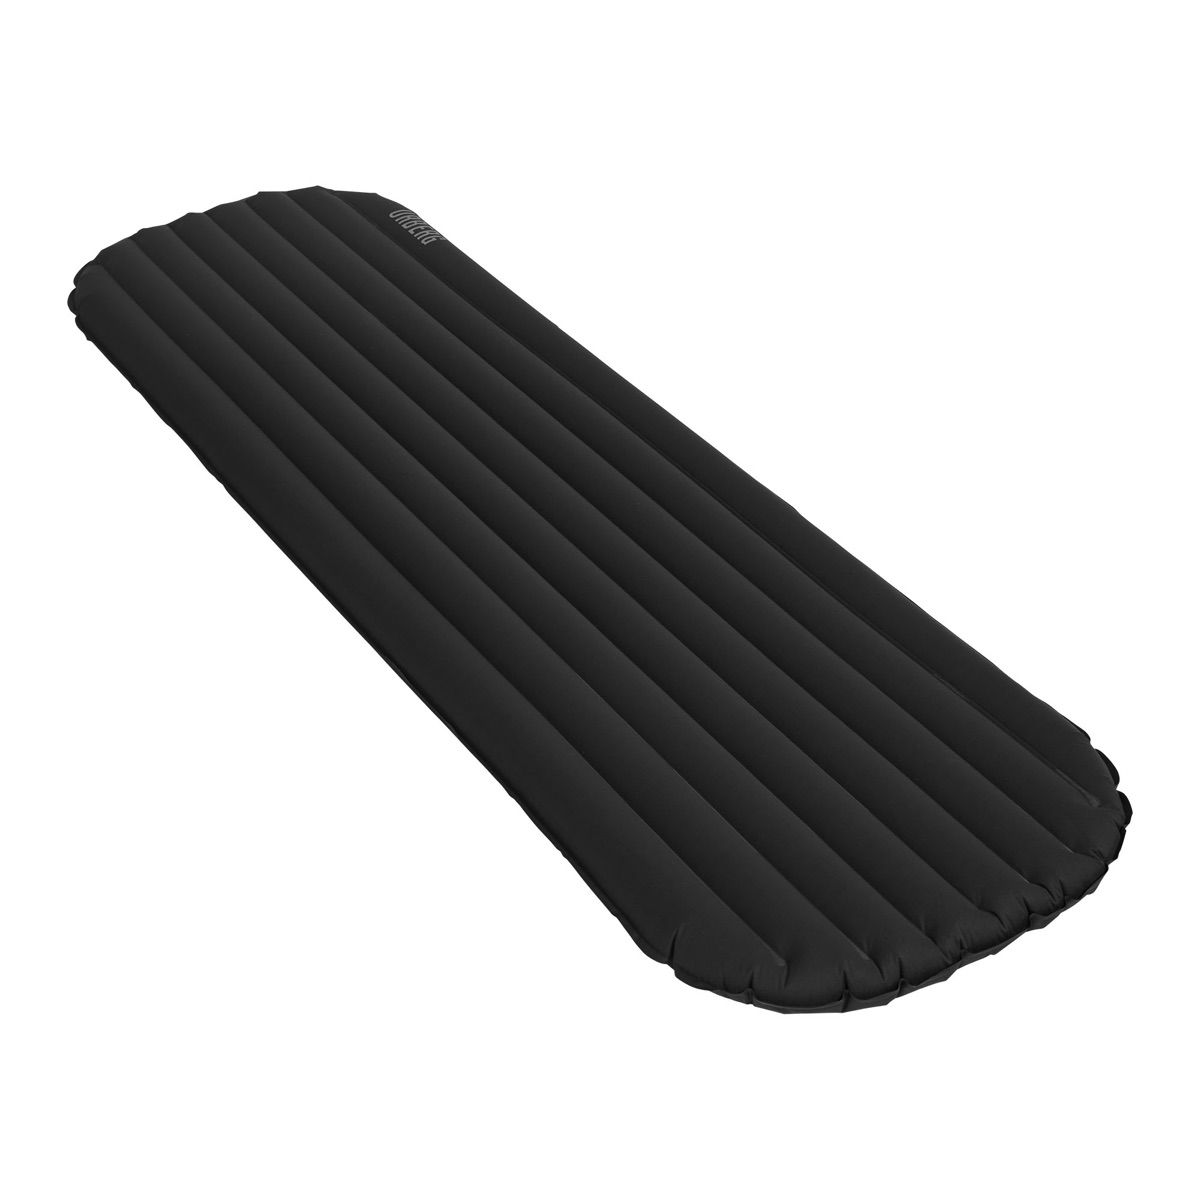 Urberg Insulated Airmat Vertical Channels Jet Black  One Size